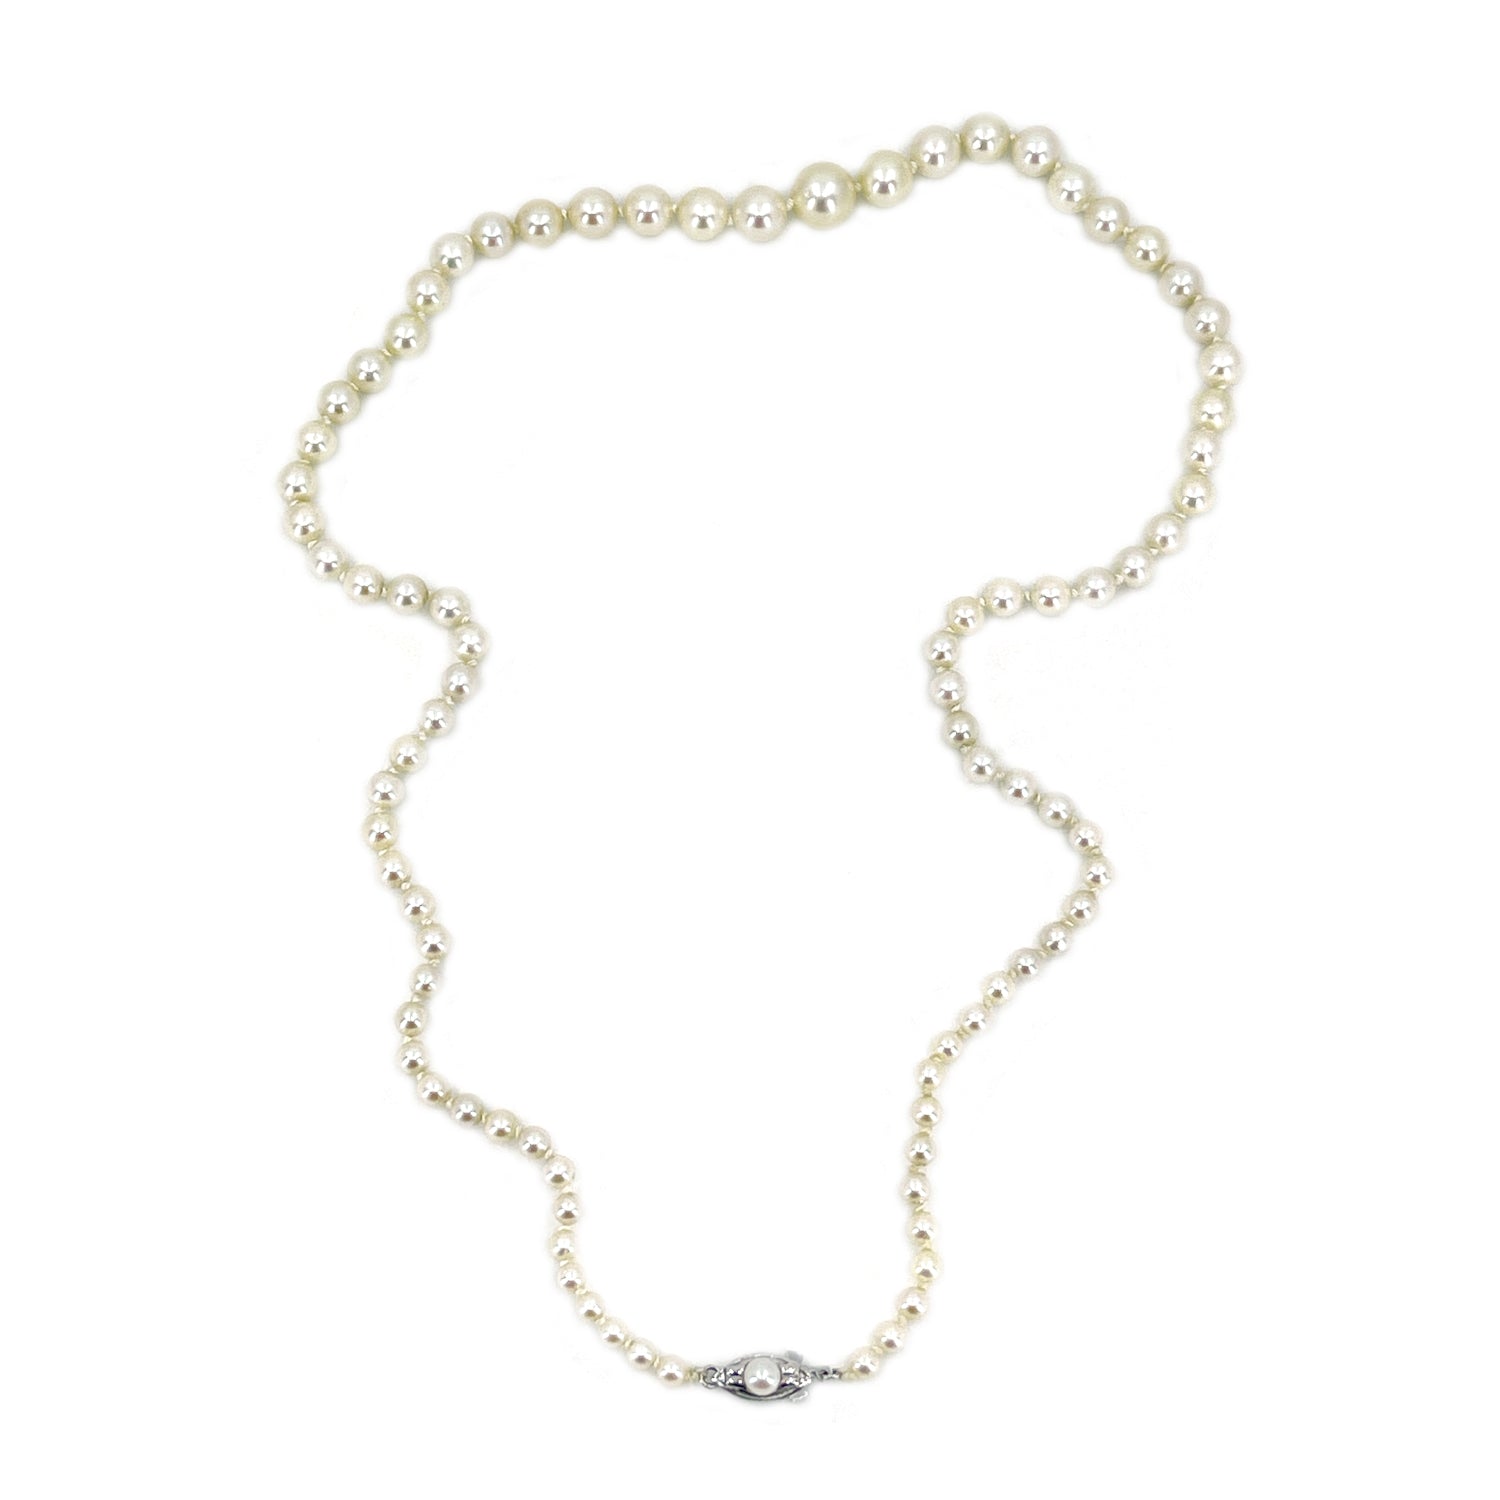 Nouveau Graduated Japanese Saltwater Cultured Akoya Pearl Strand - 14K White Gold 19 Inch